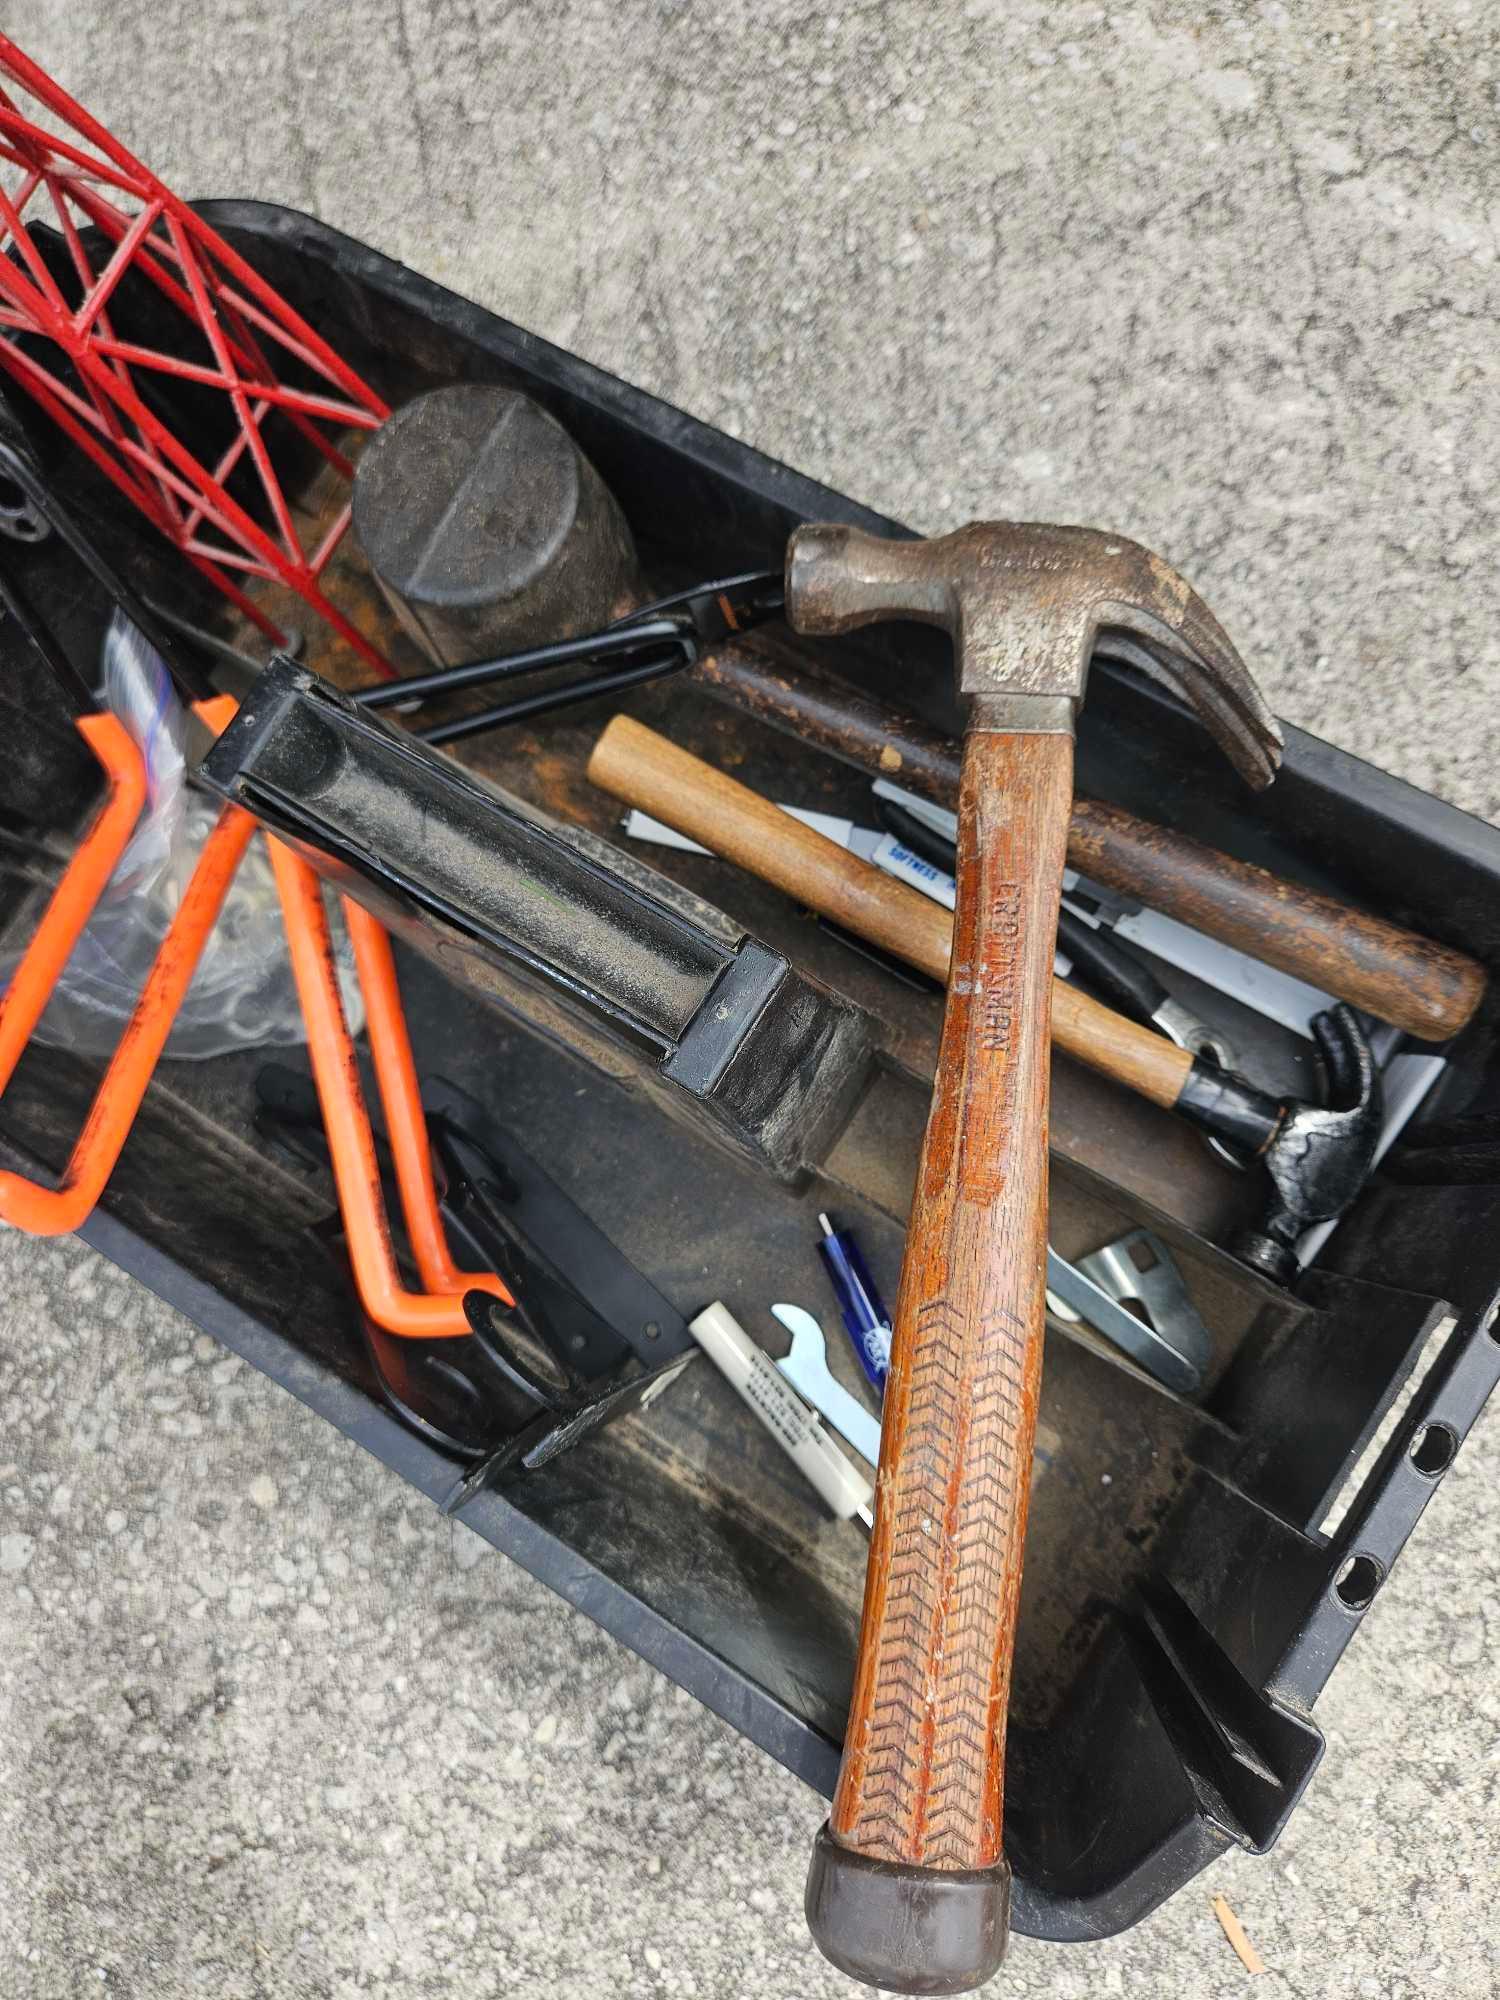 Craftsman Hammer, and Tote of tools